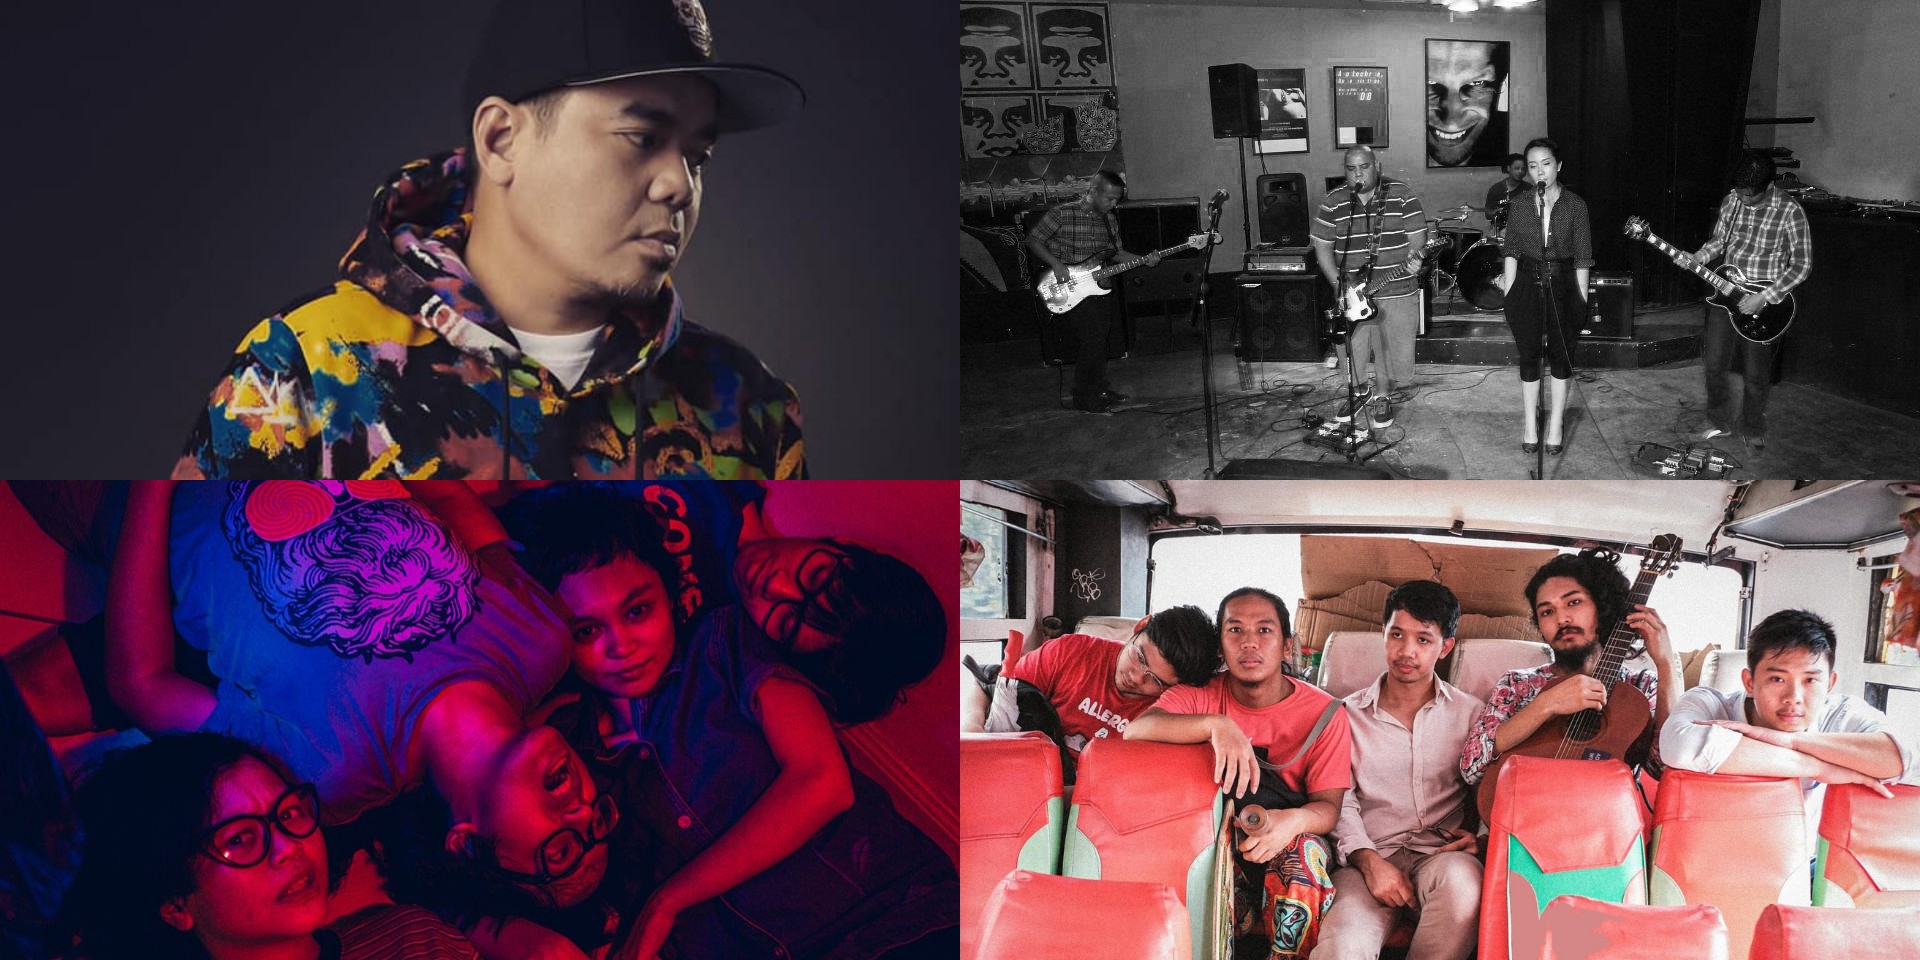 The Buildings, Gloc-9, Pinkmen, Soft Pillow Kisses, and more release new music – listen